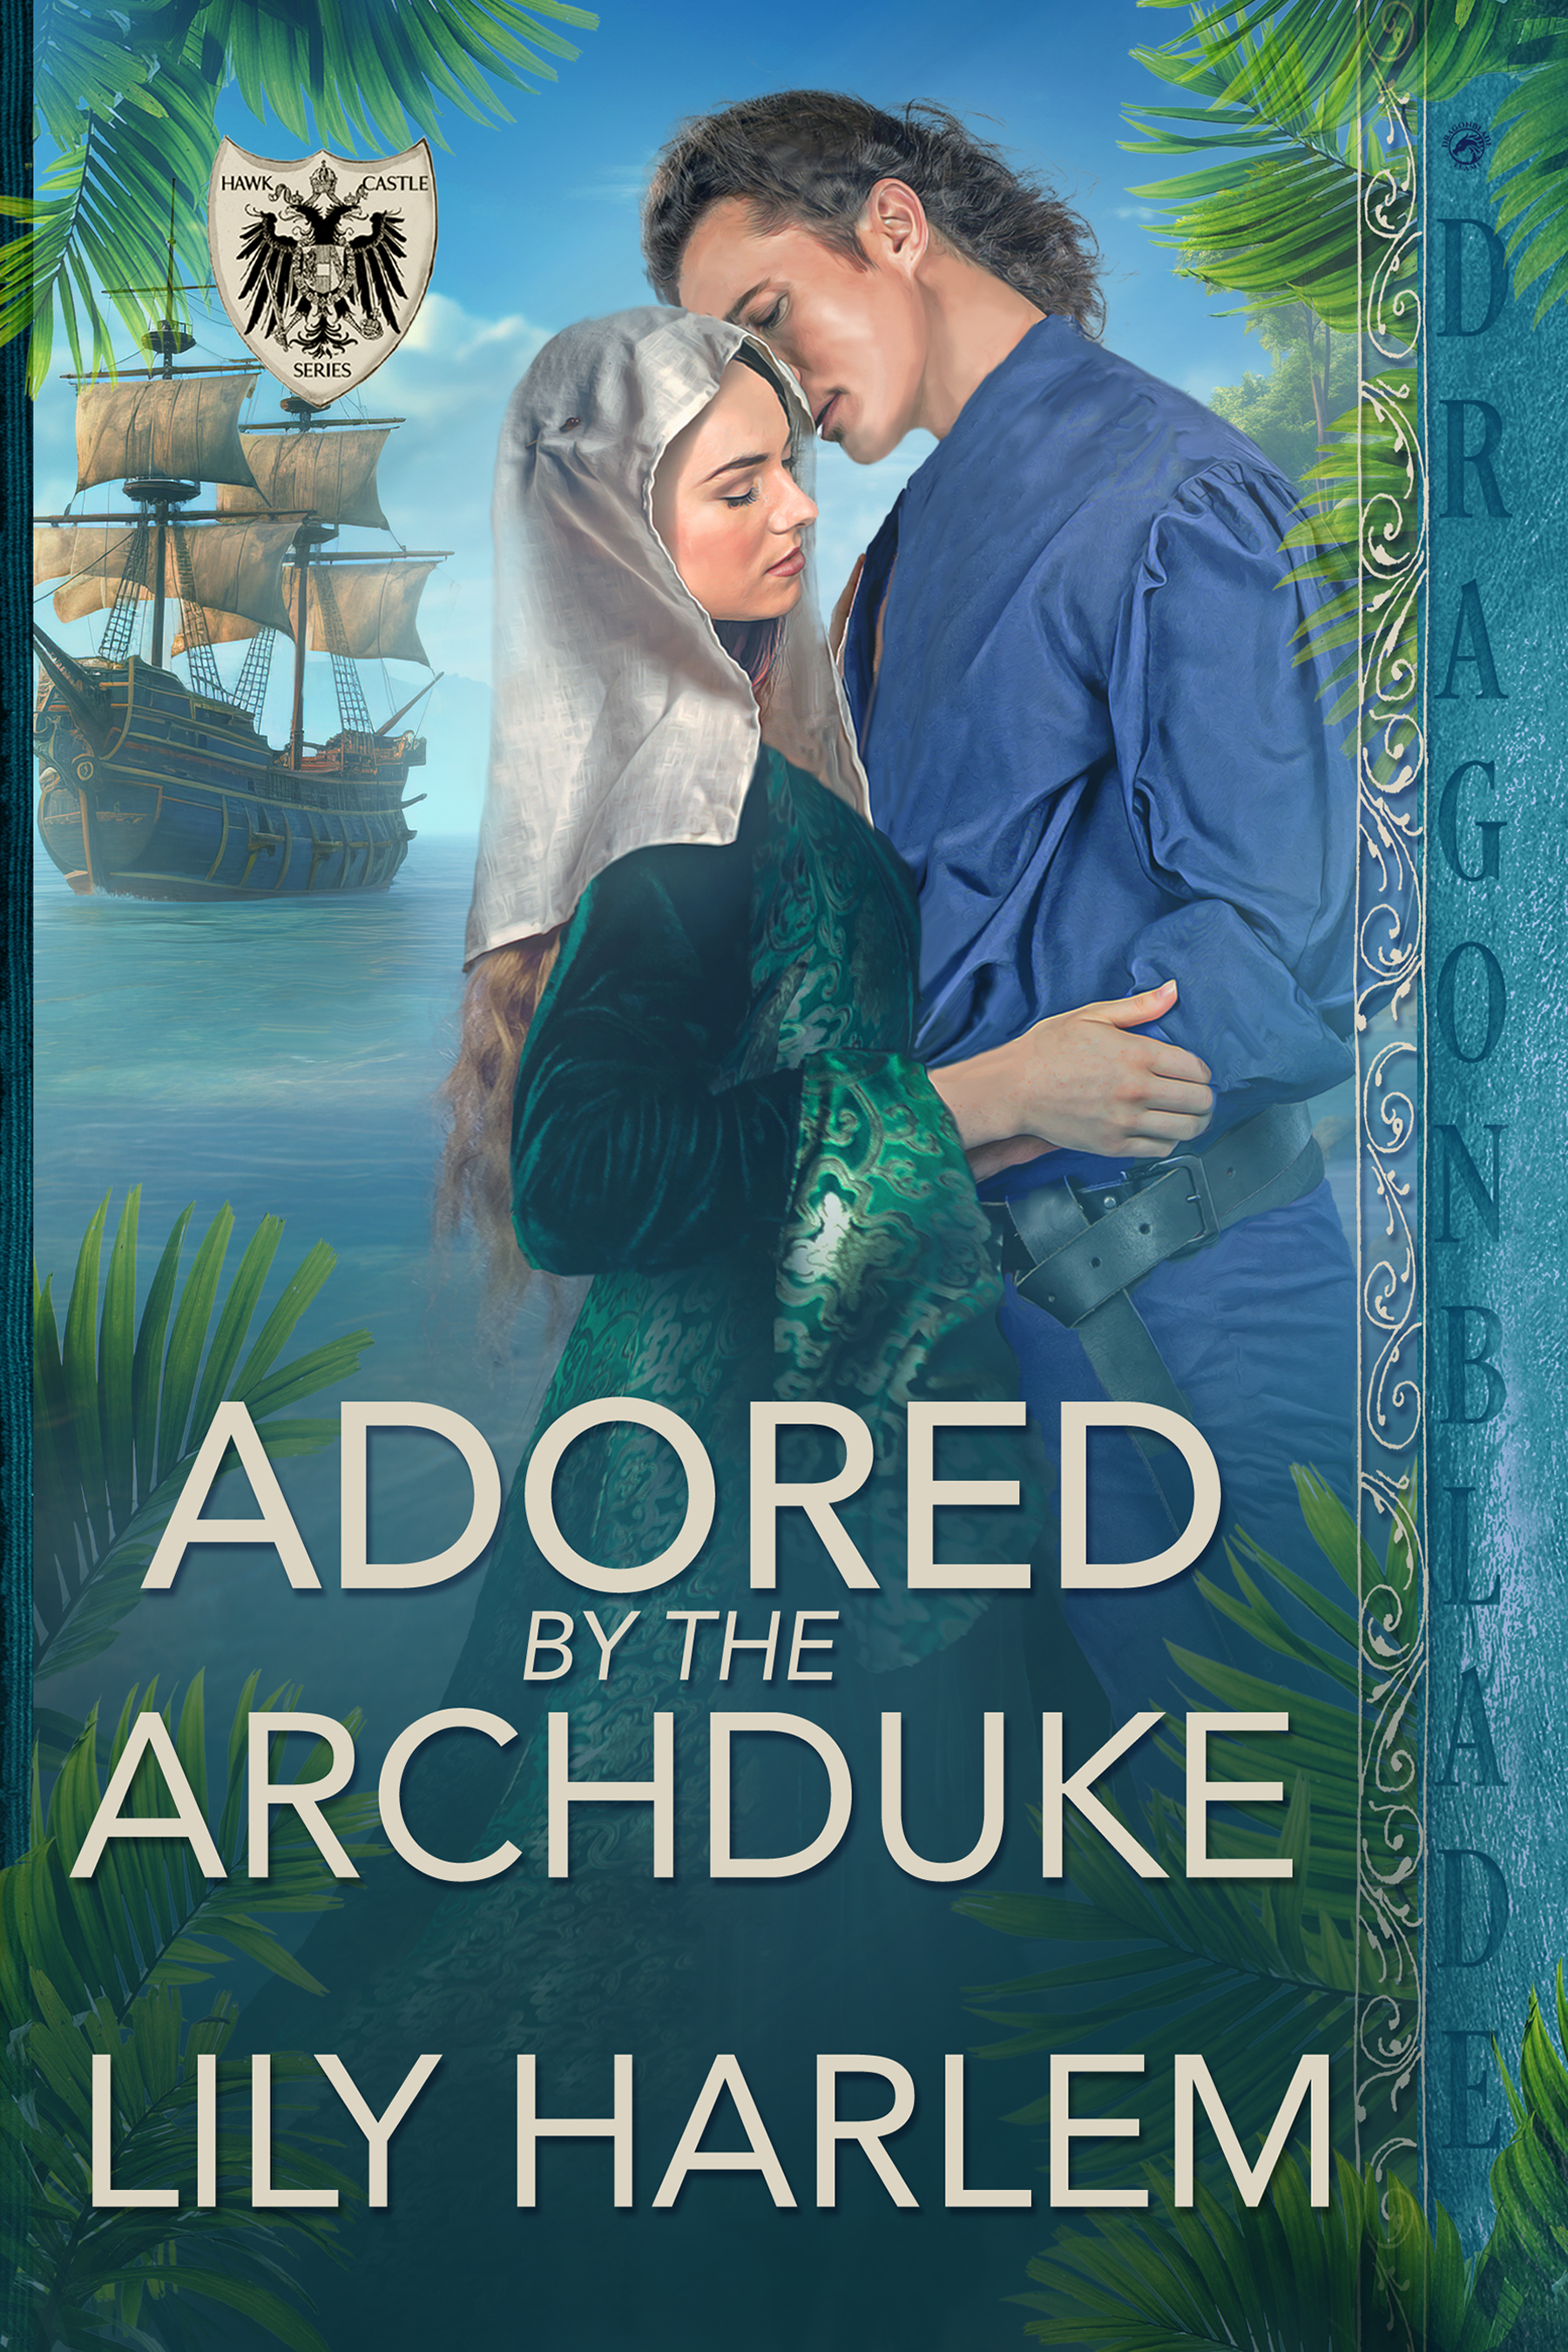 Adored by the Archduke: A Medieval Historical Romance (Hawk Castle Book 2)